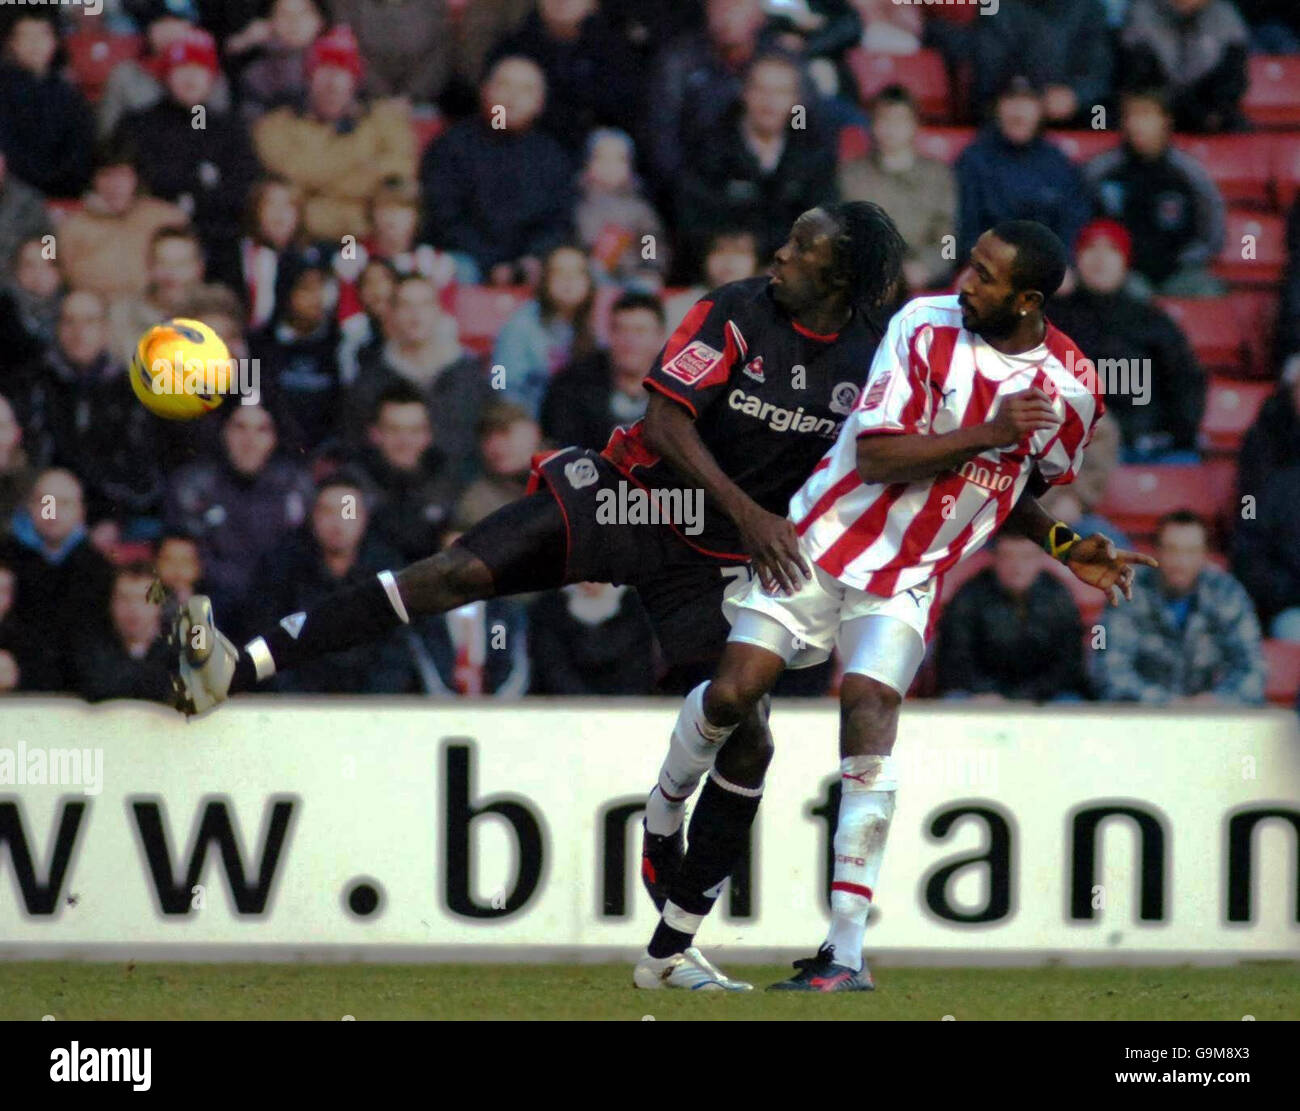 Stoke City's Ricardo Fuller (right) and Queens Park Rangers' Damion Stewart battle during the Coca-Cola Championship match at the Britannia Stadium, Stoke. Stock Photo